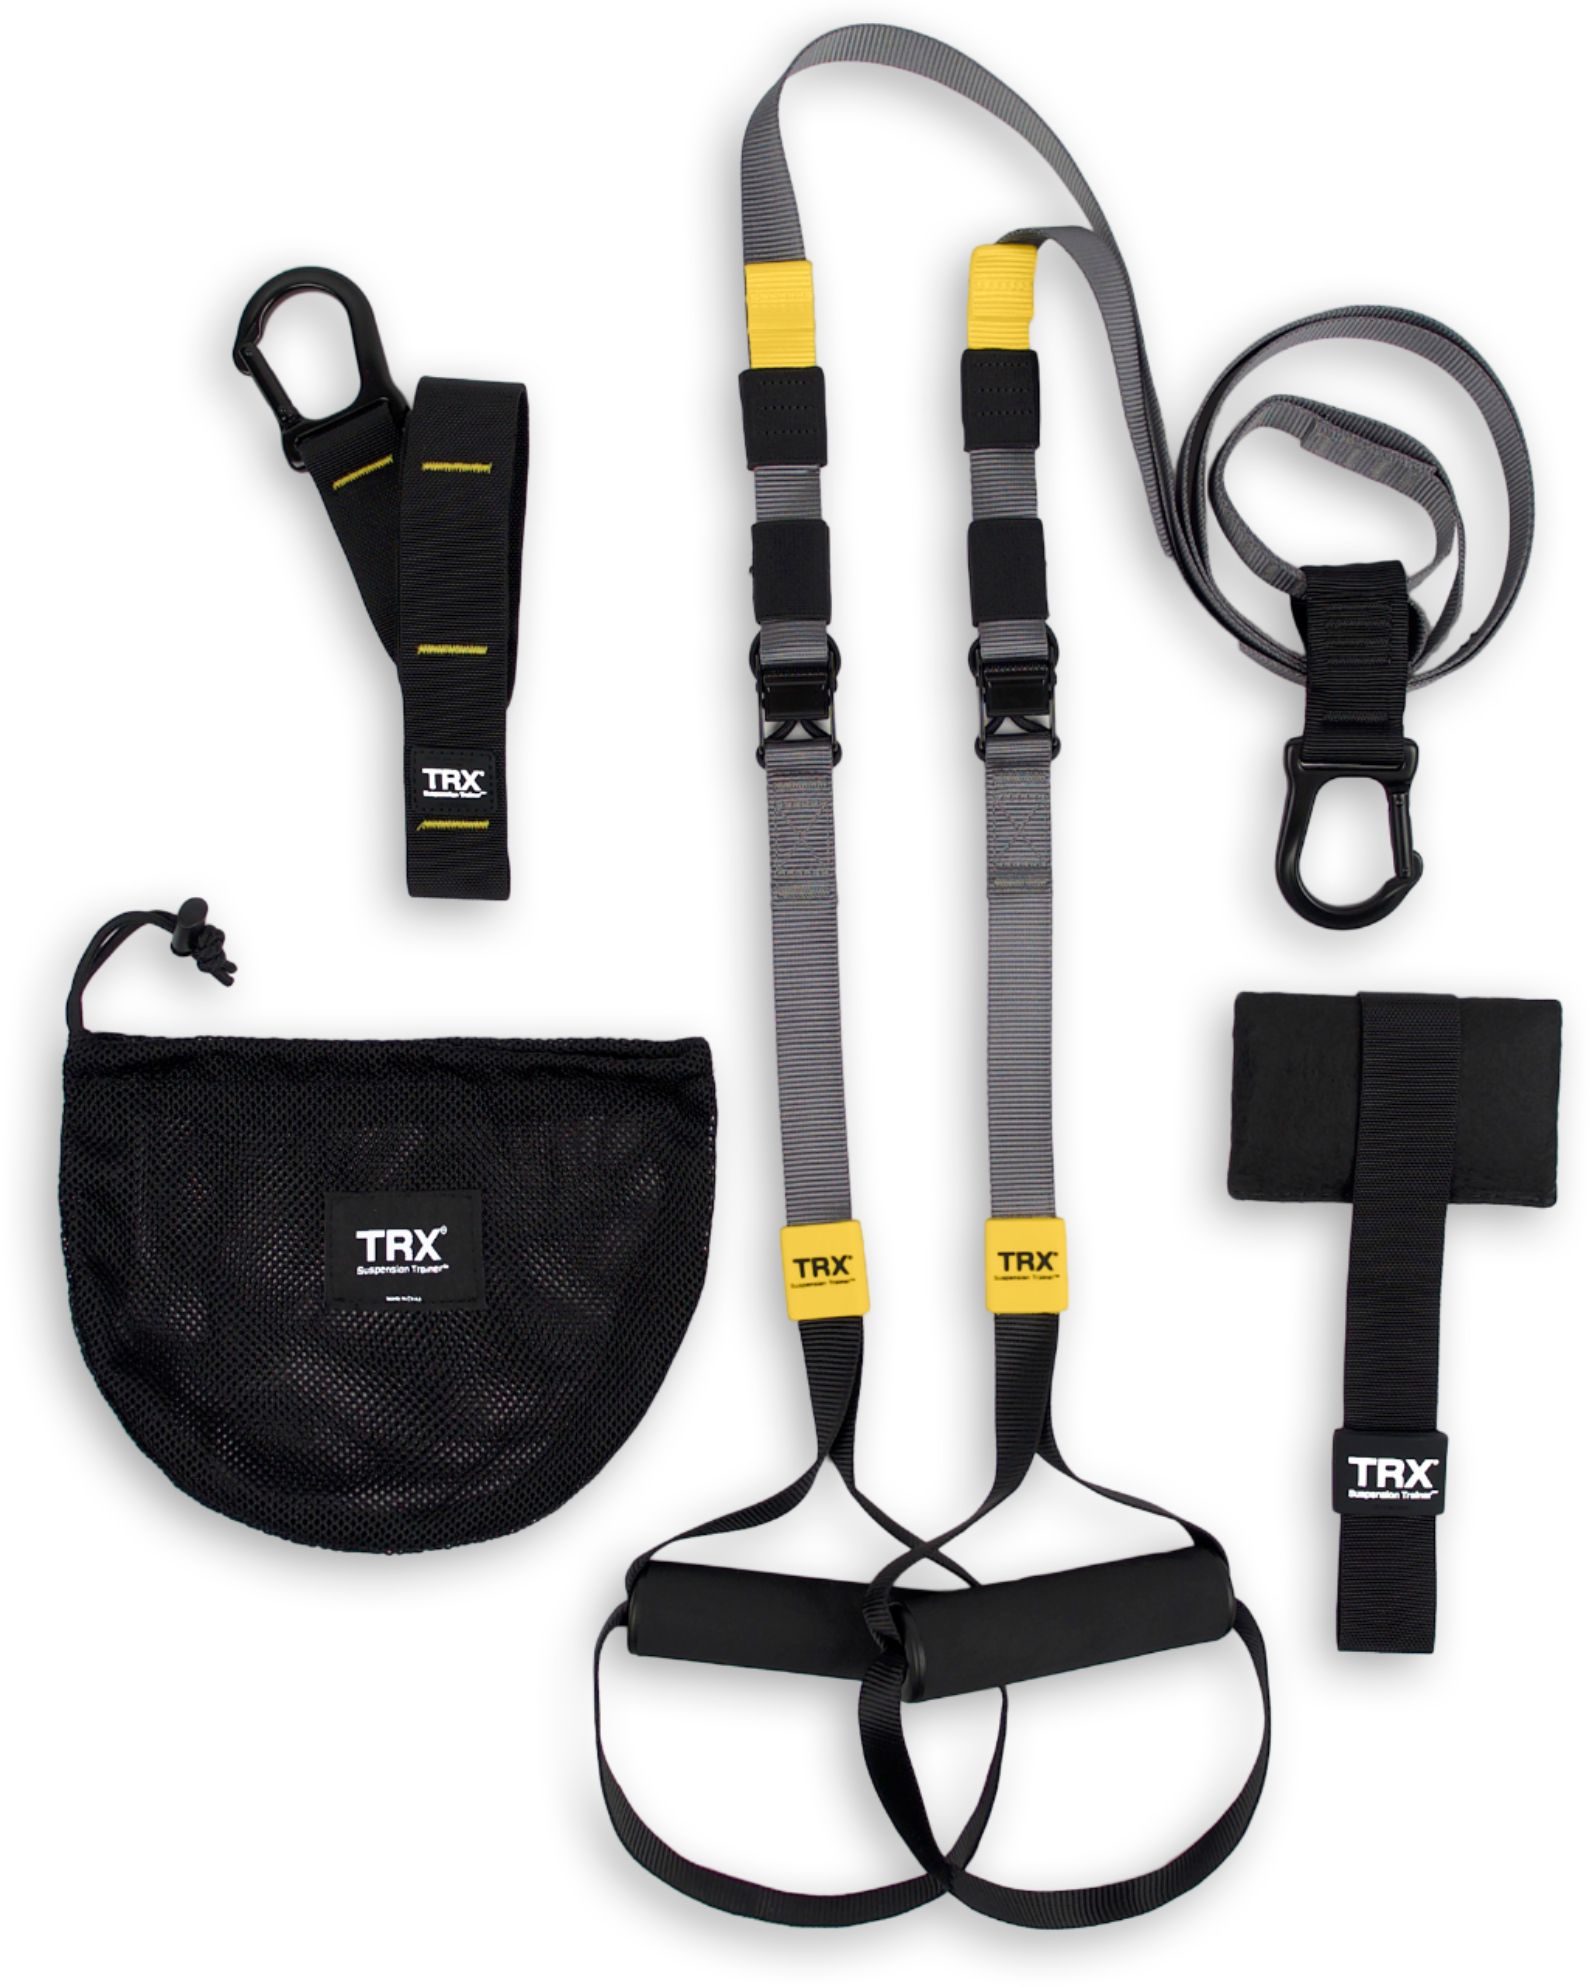 TRX Suspension Training: Bodyweight Fitness Resistance Training Fitness for All Levels & All Goals for Total Body Workouts for Home & Travel Workout Poster Included Lightweight & Portable 